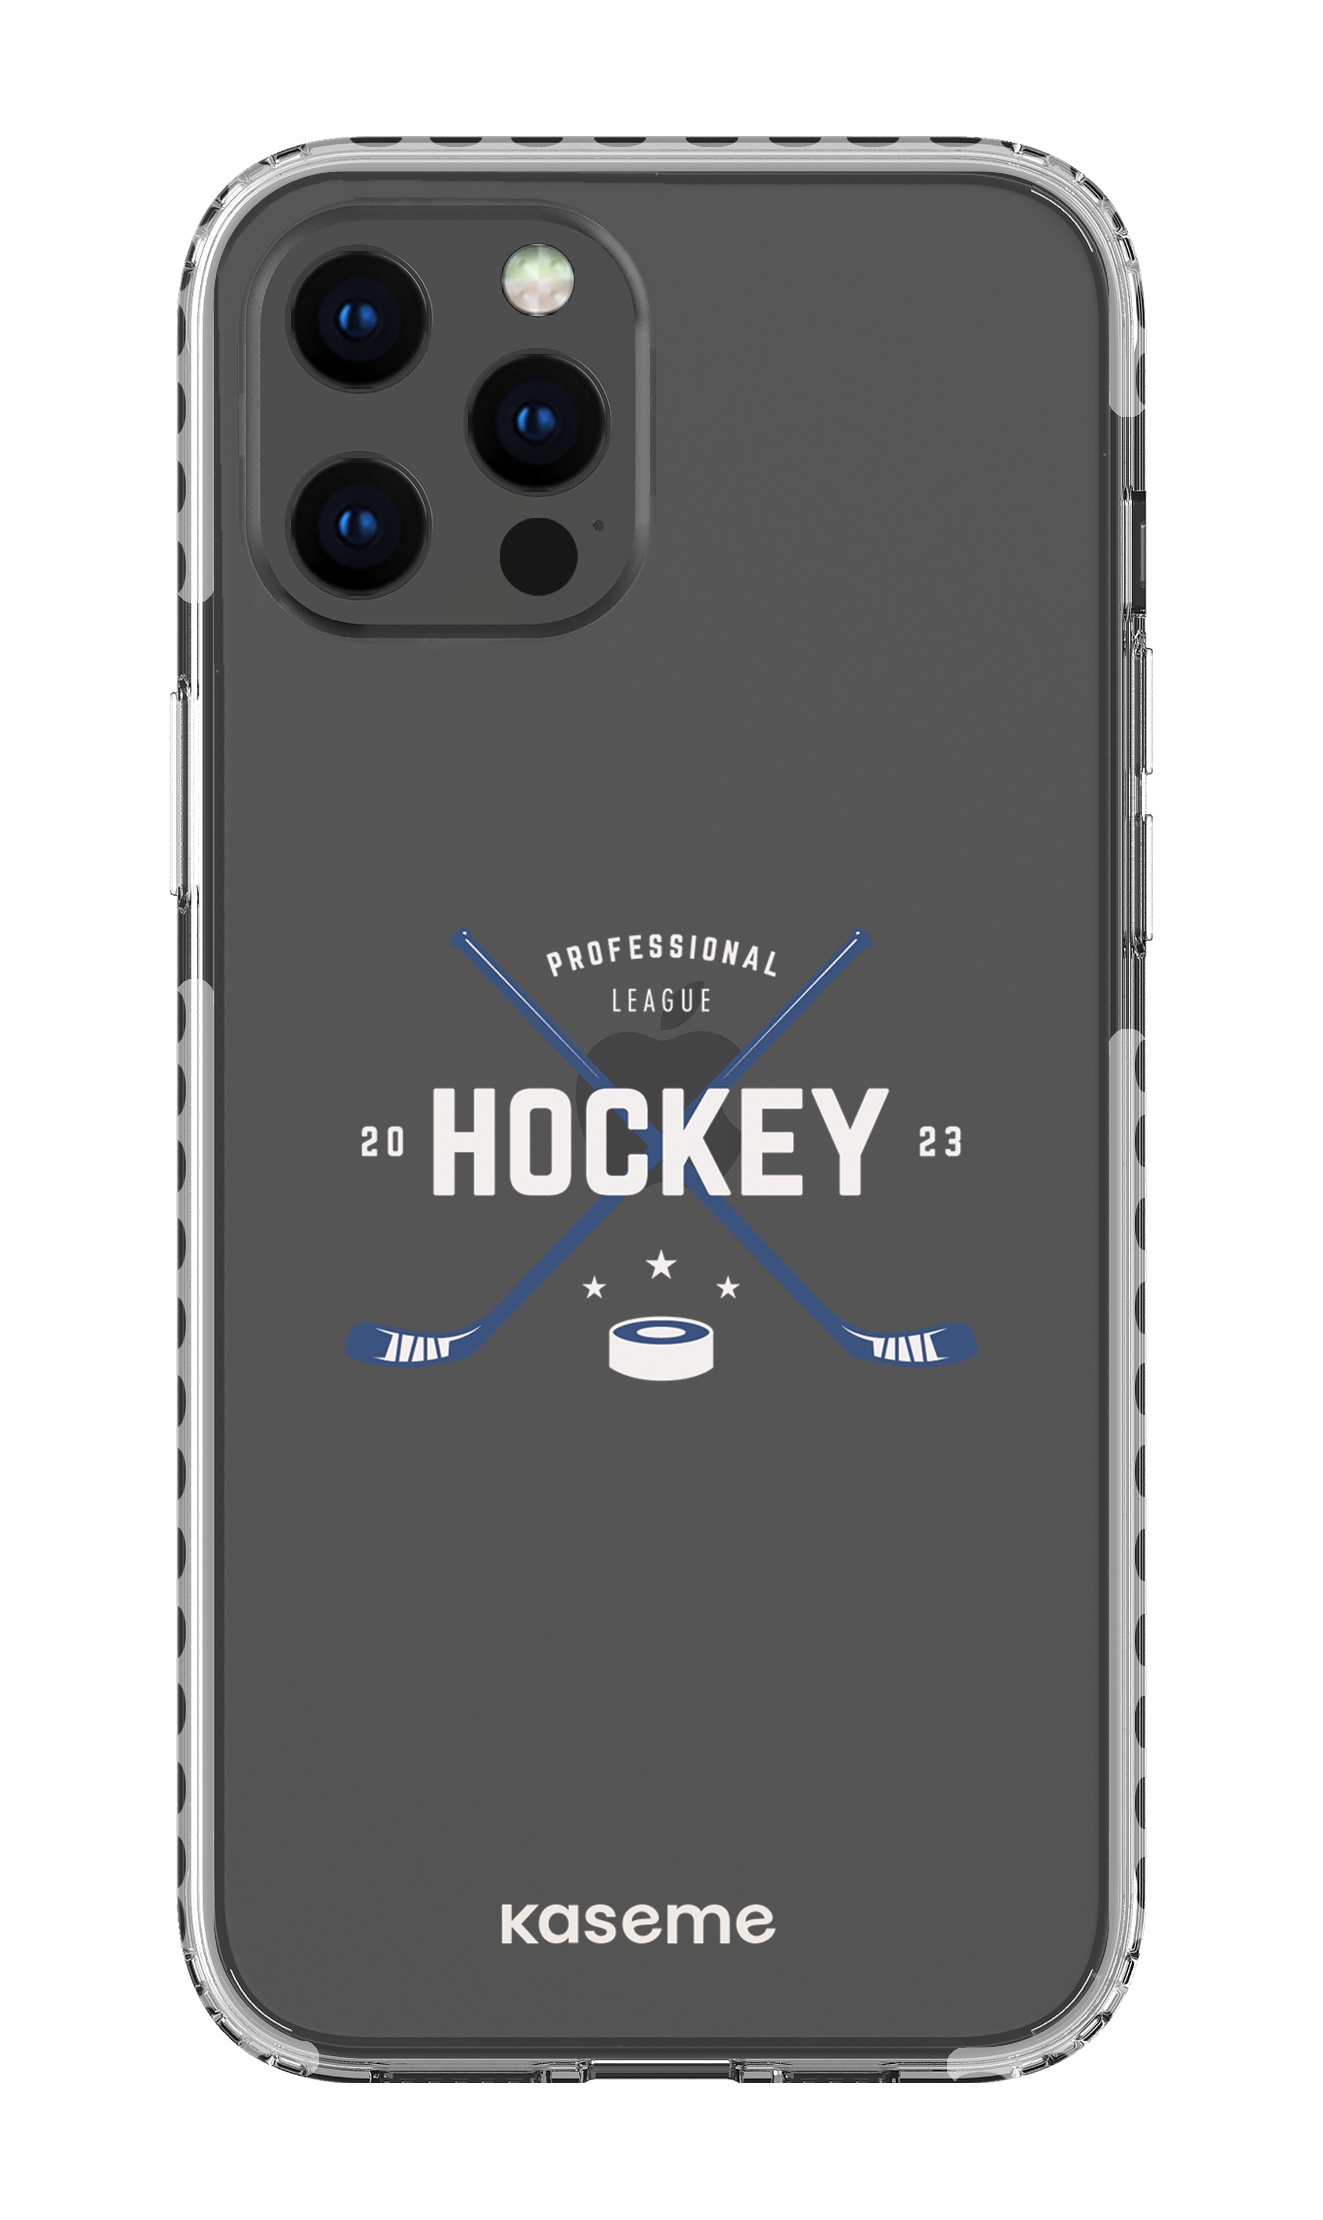 Playoffs clear case - iPhone 12 Pro Max